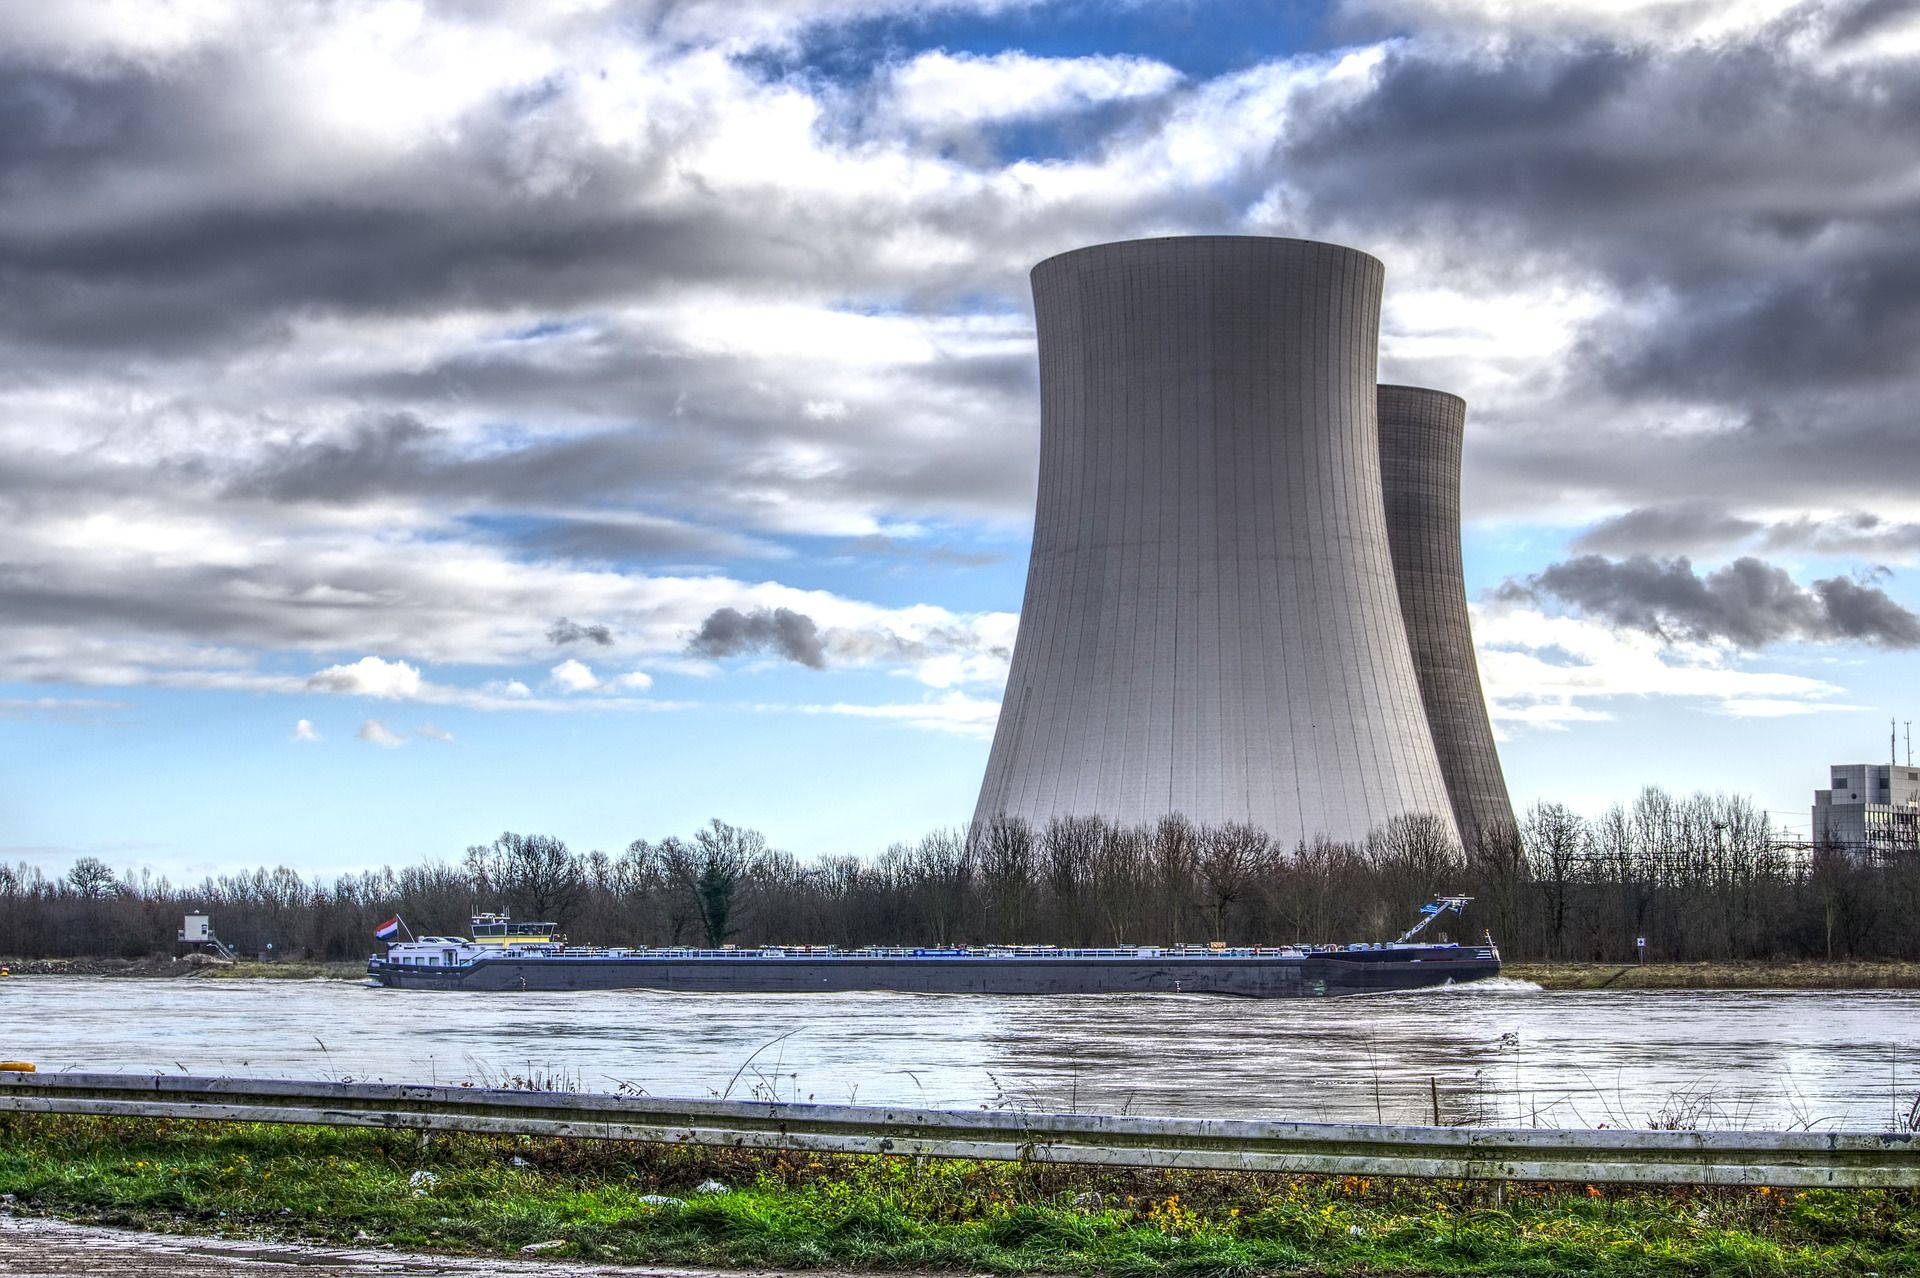 New nuclear power plants in the Netherlands before 2030? It's not impossible, but the list of conditions is long